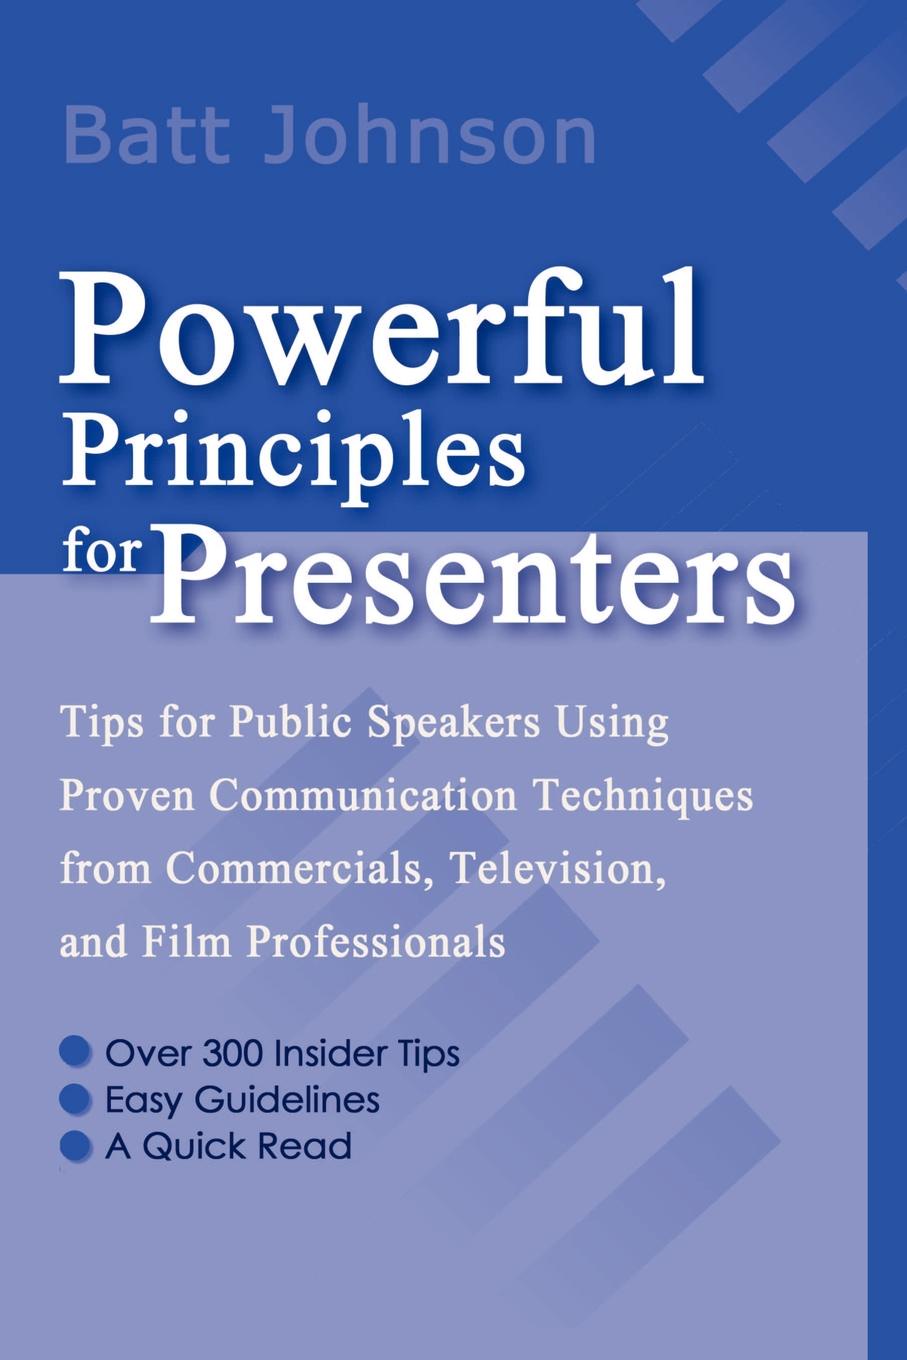 Powerful Principles for Presenters. Tips for Public Speakers Using Proven Communication Techniques from Commercials, Television, and Film Professional